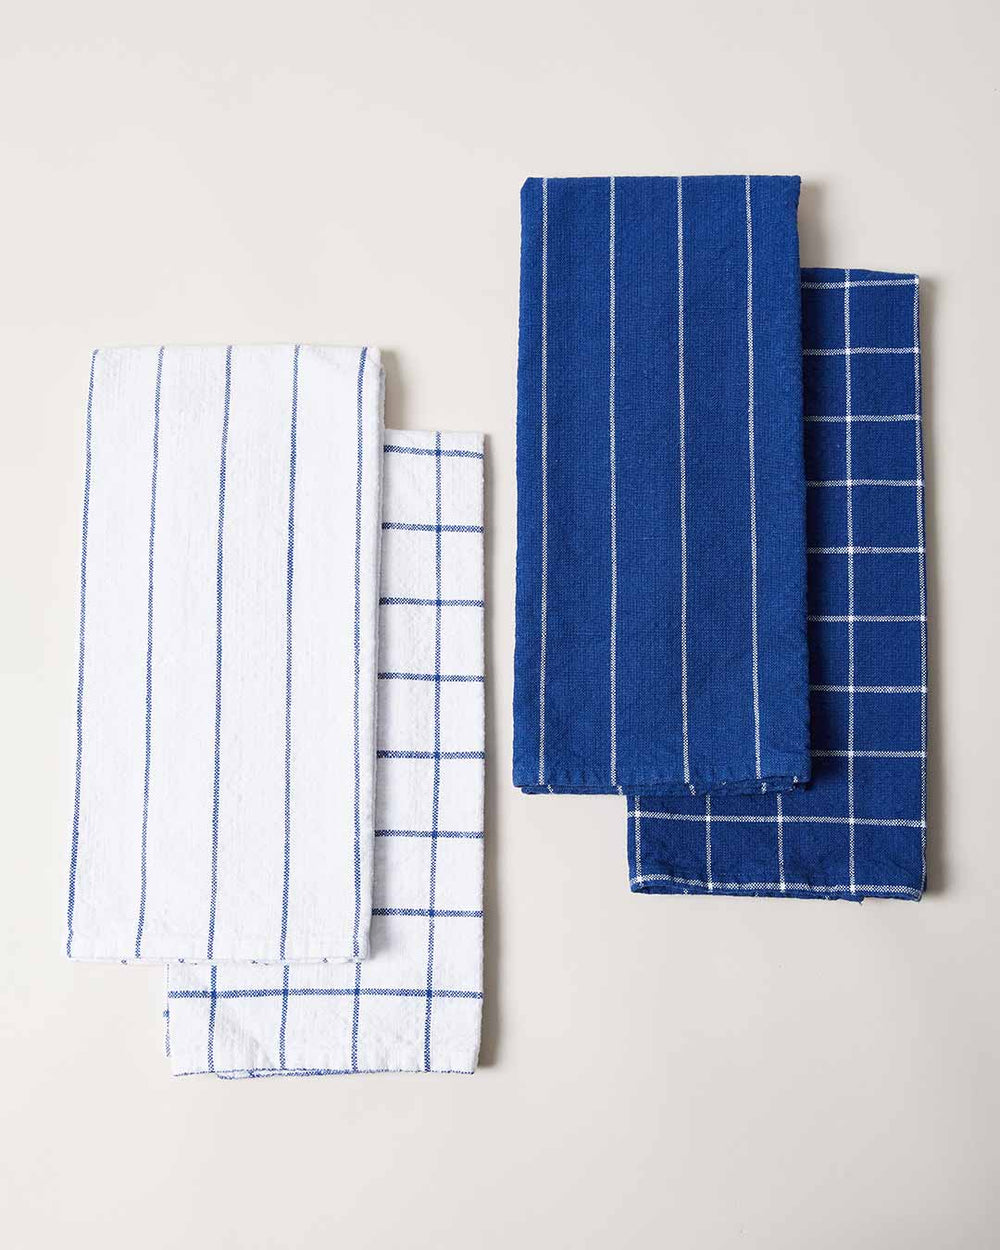 All Cotton and Linen Dark Blue and White Checkered Dish Towels | Set of 6, Cotton Kitchen Towels